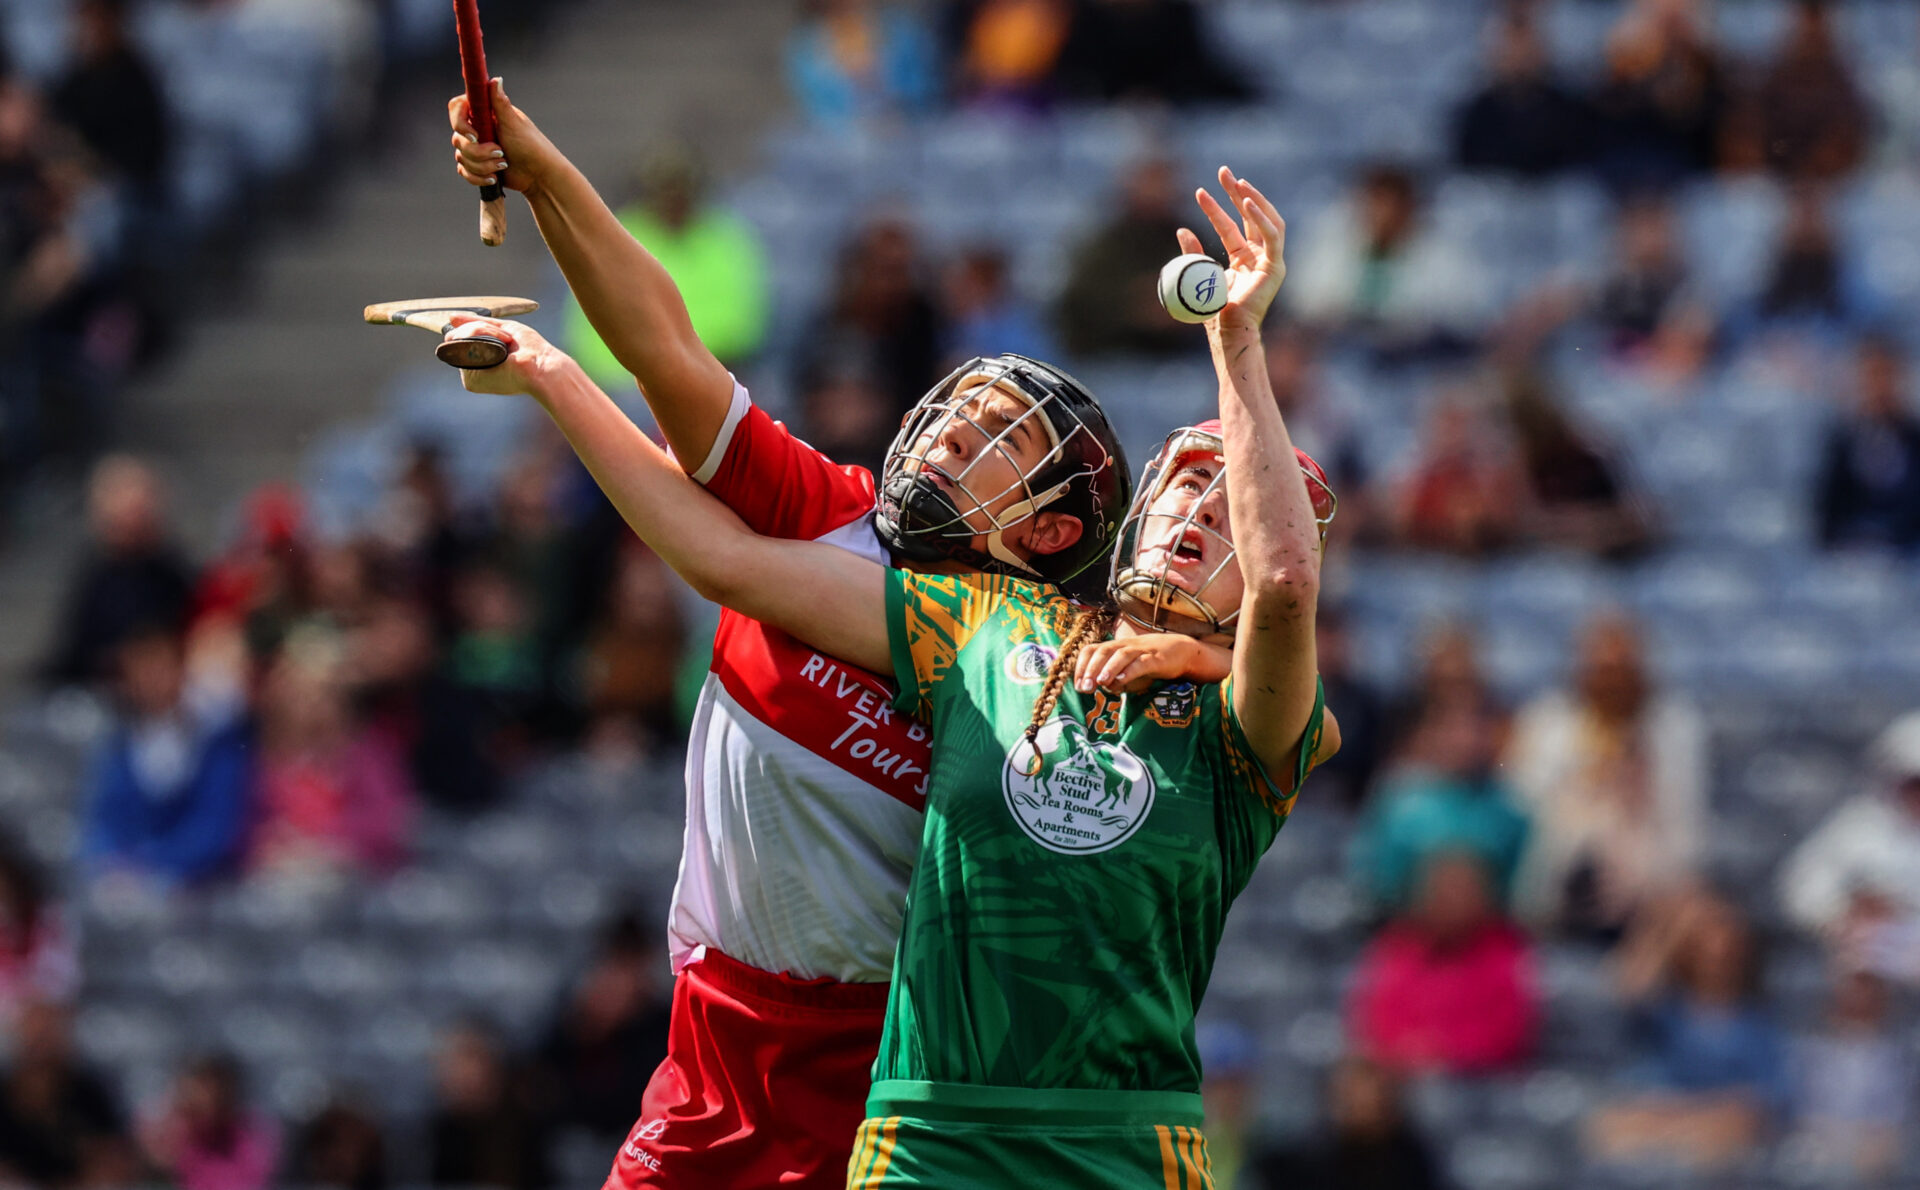 REACTION: “Reset and go again” – Derry and Meath face replay